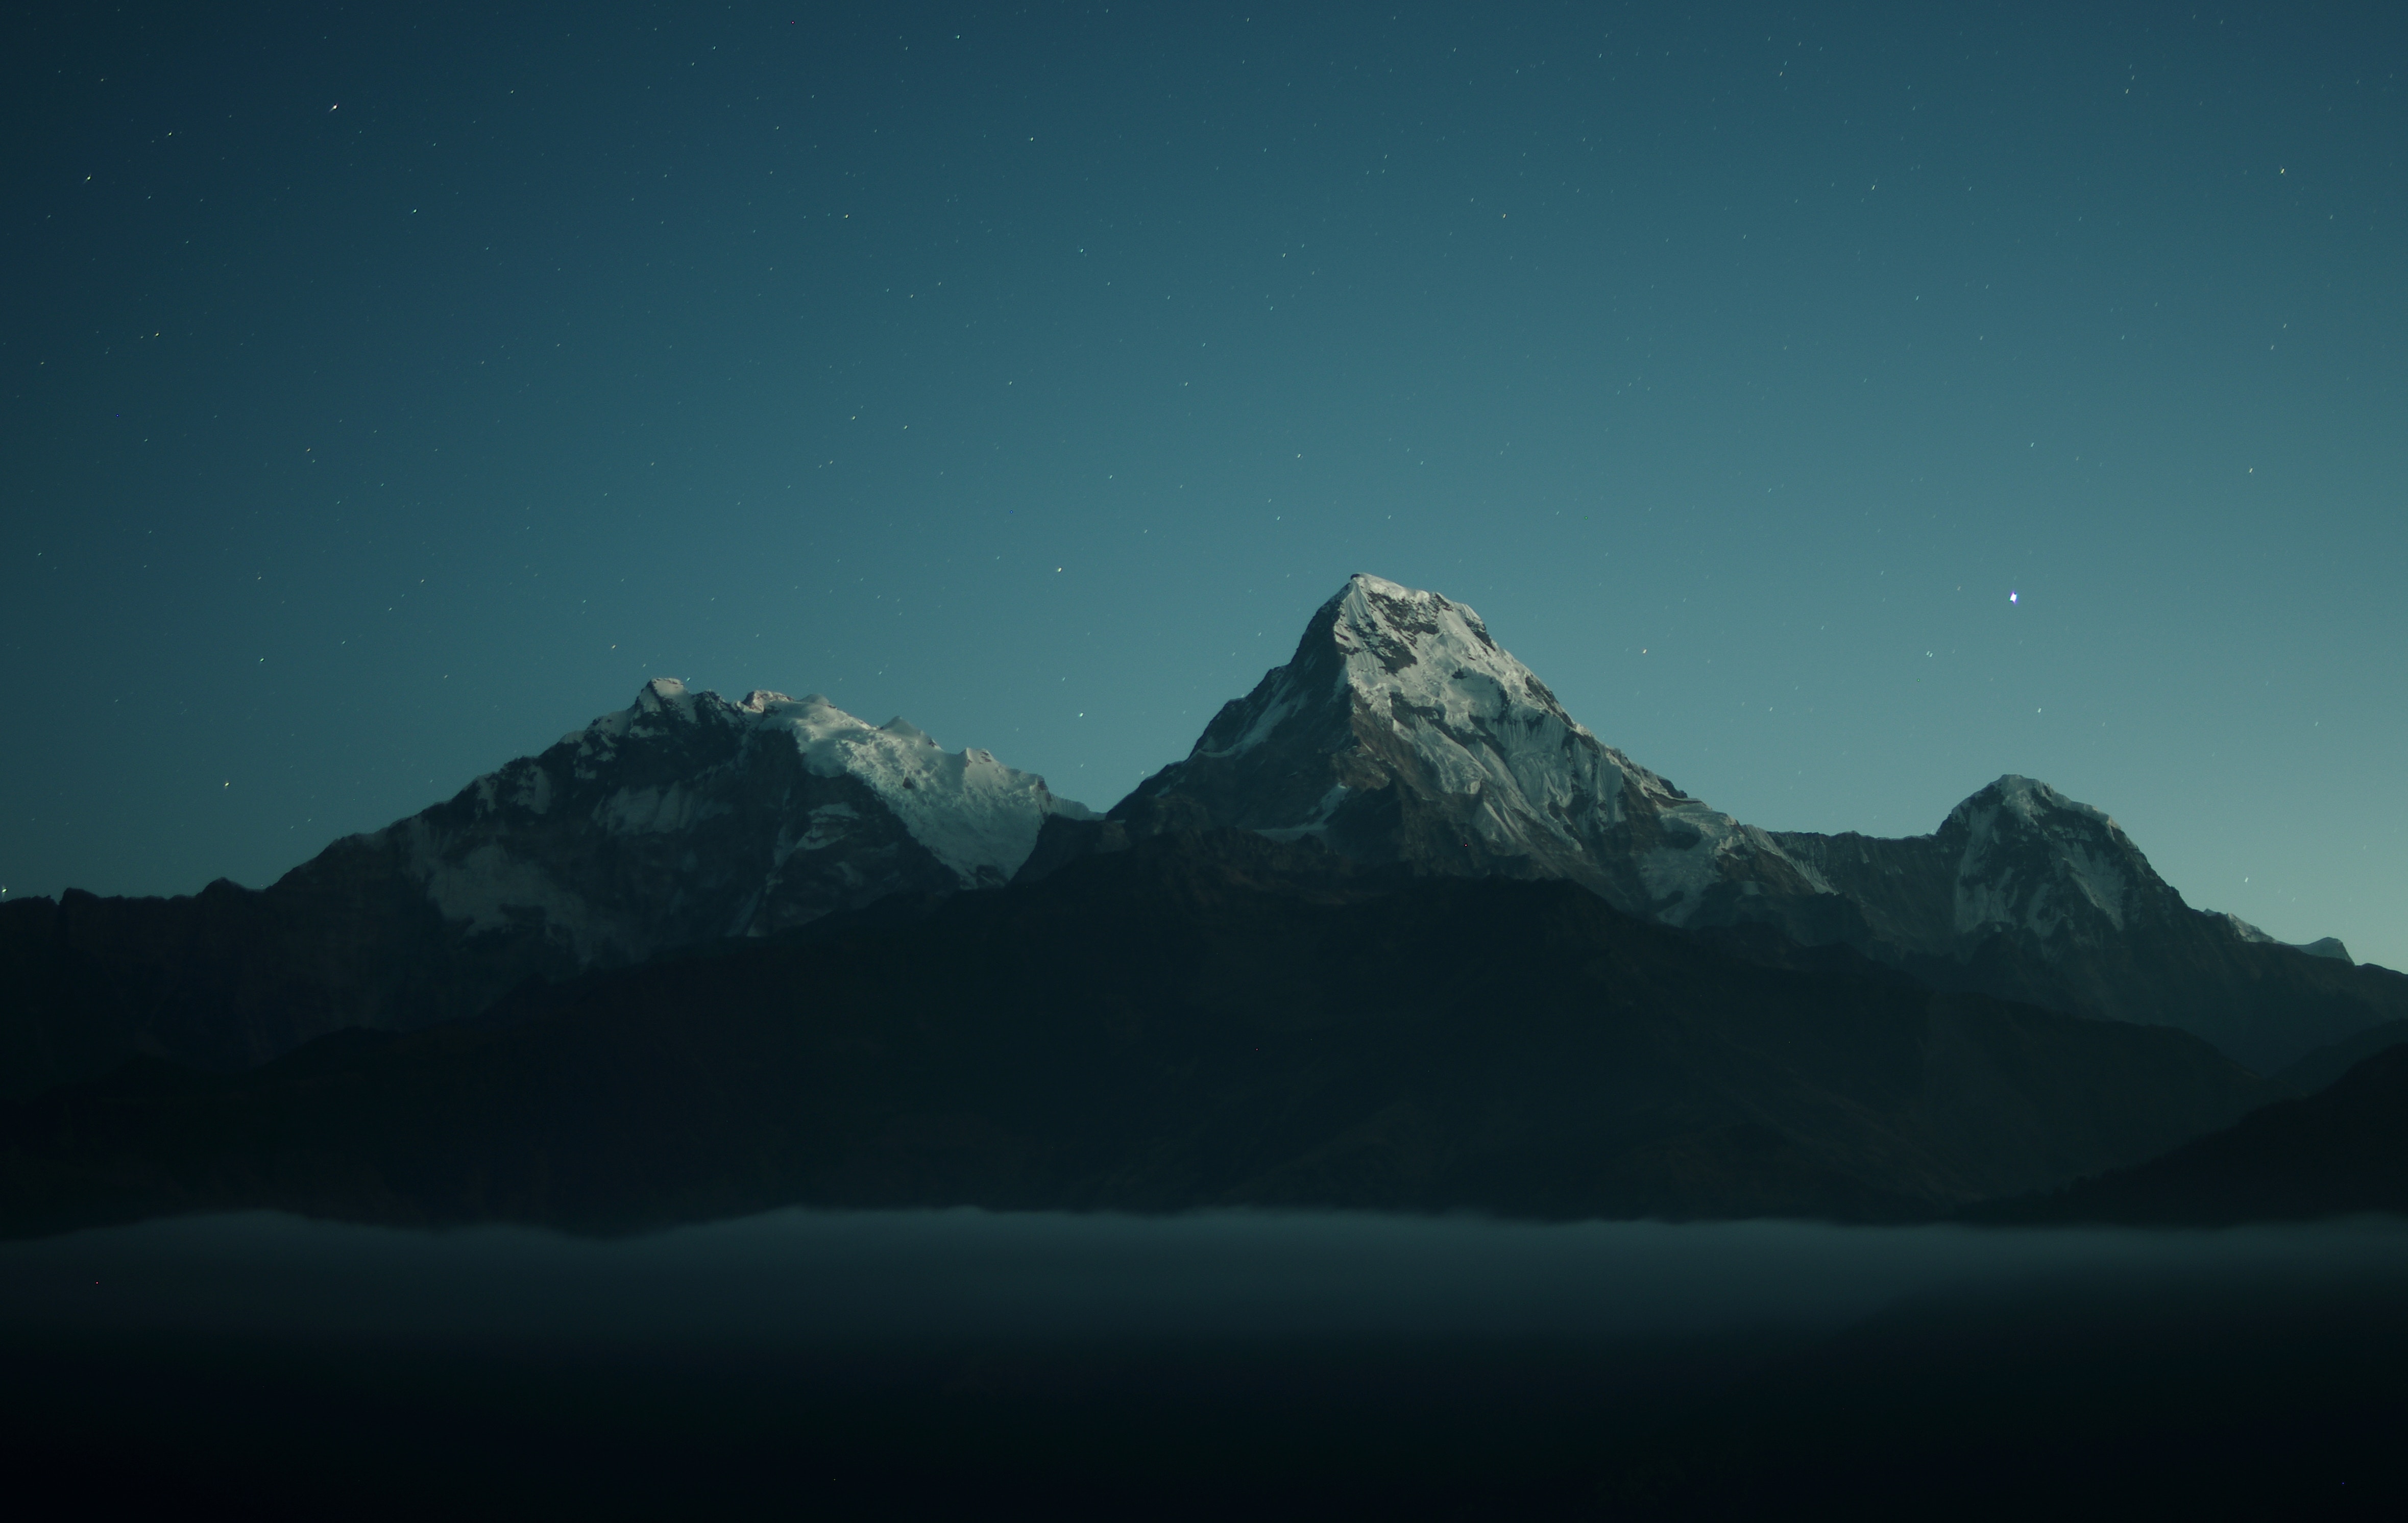 Mountains at Night by Daniel Leone